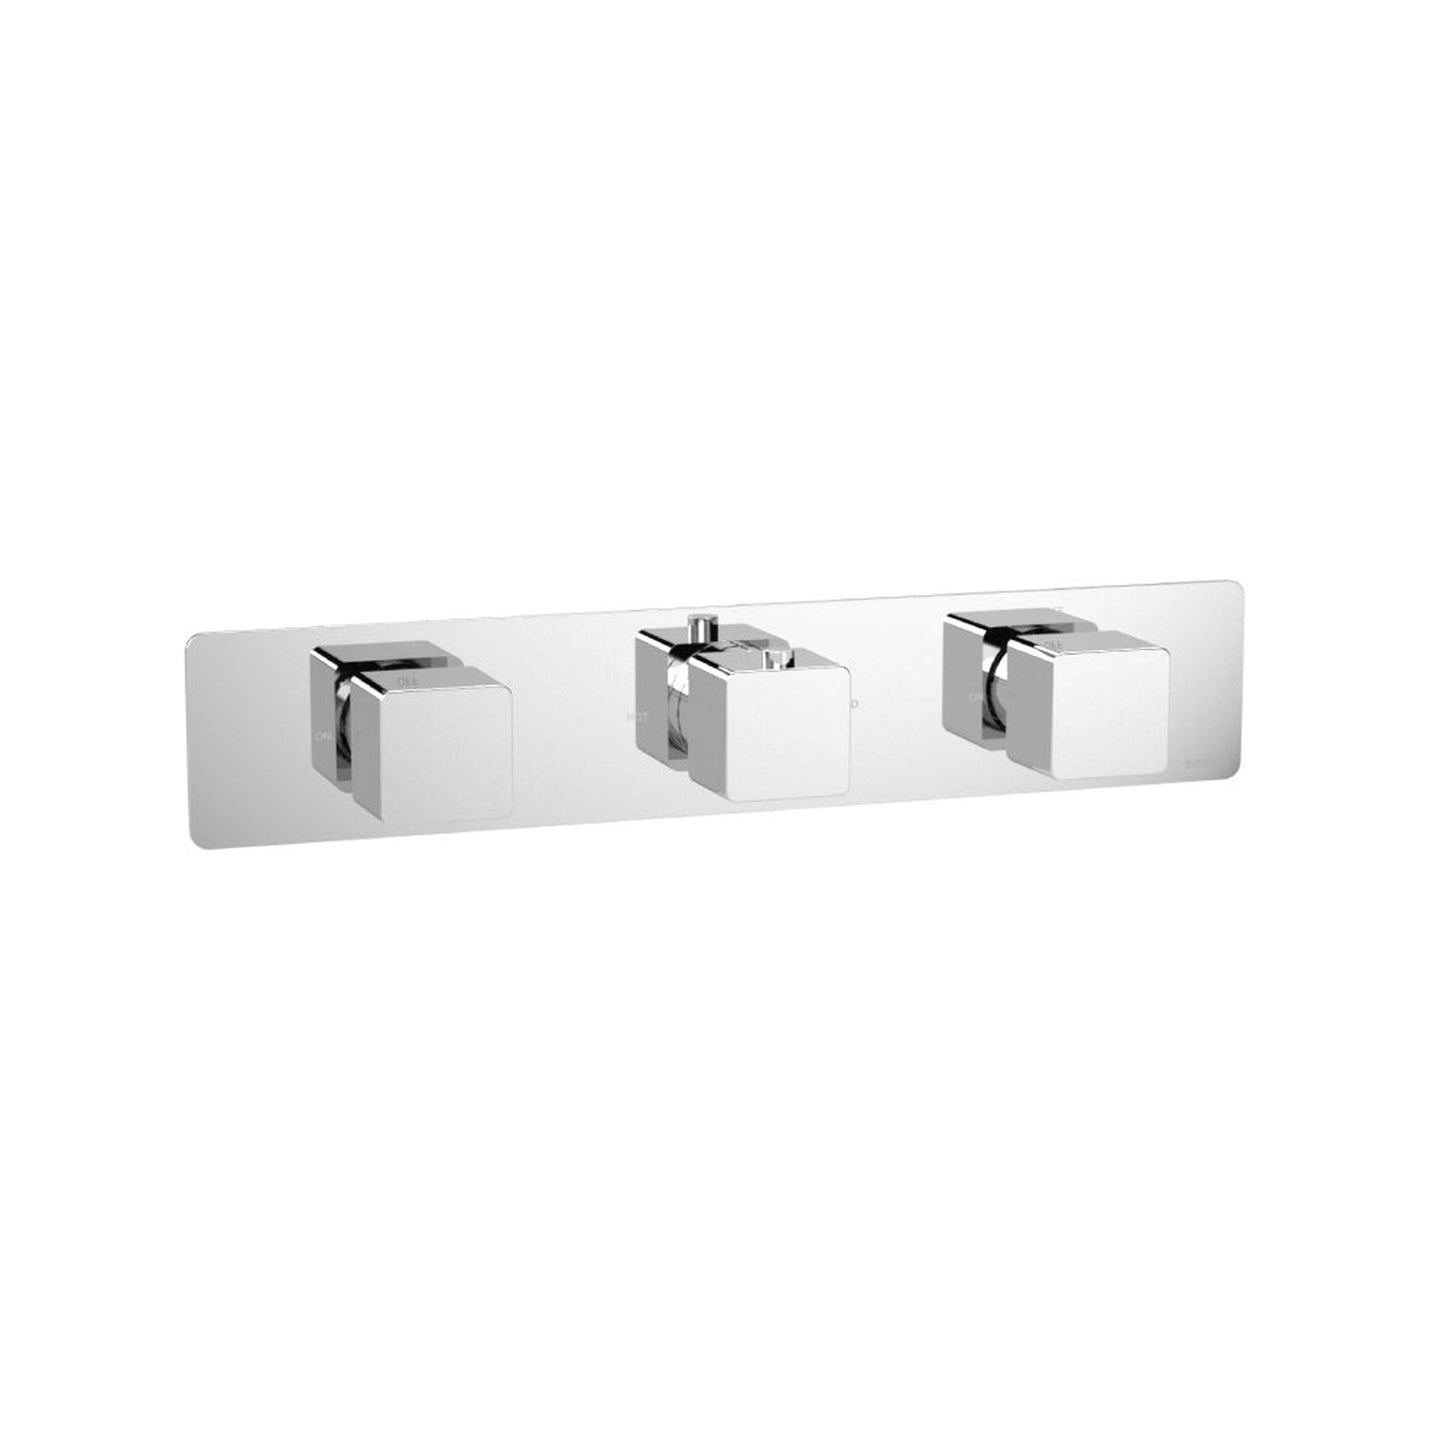 Isenberg Serie 196 Two Output Trim for Horizontal Thermostatic Valve With 2 Volume Control in Polished Nickel